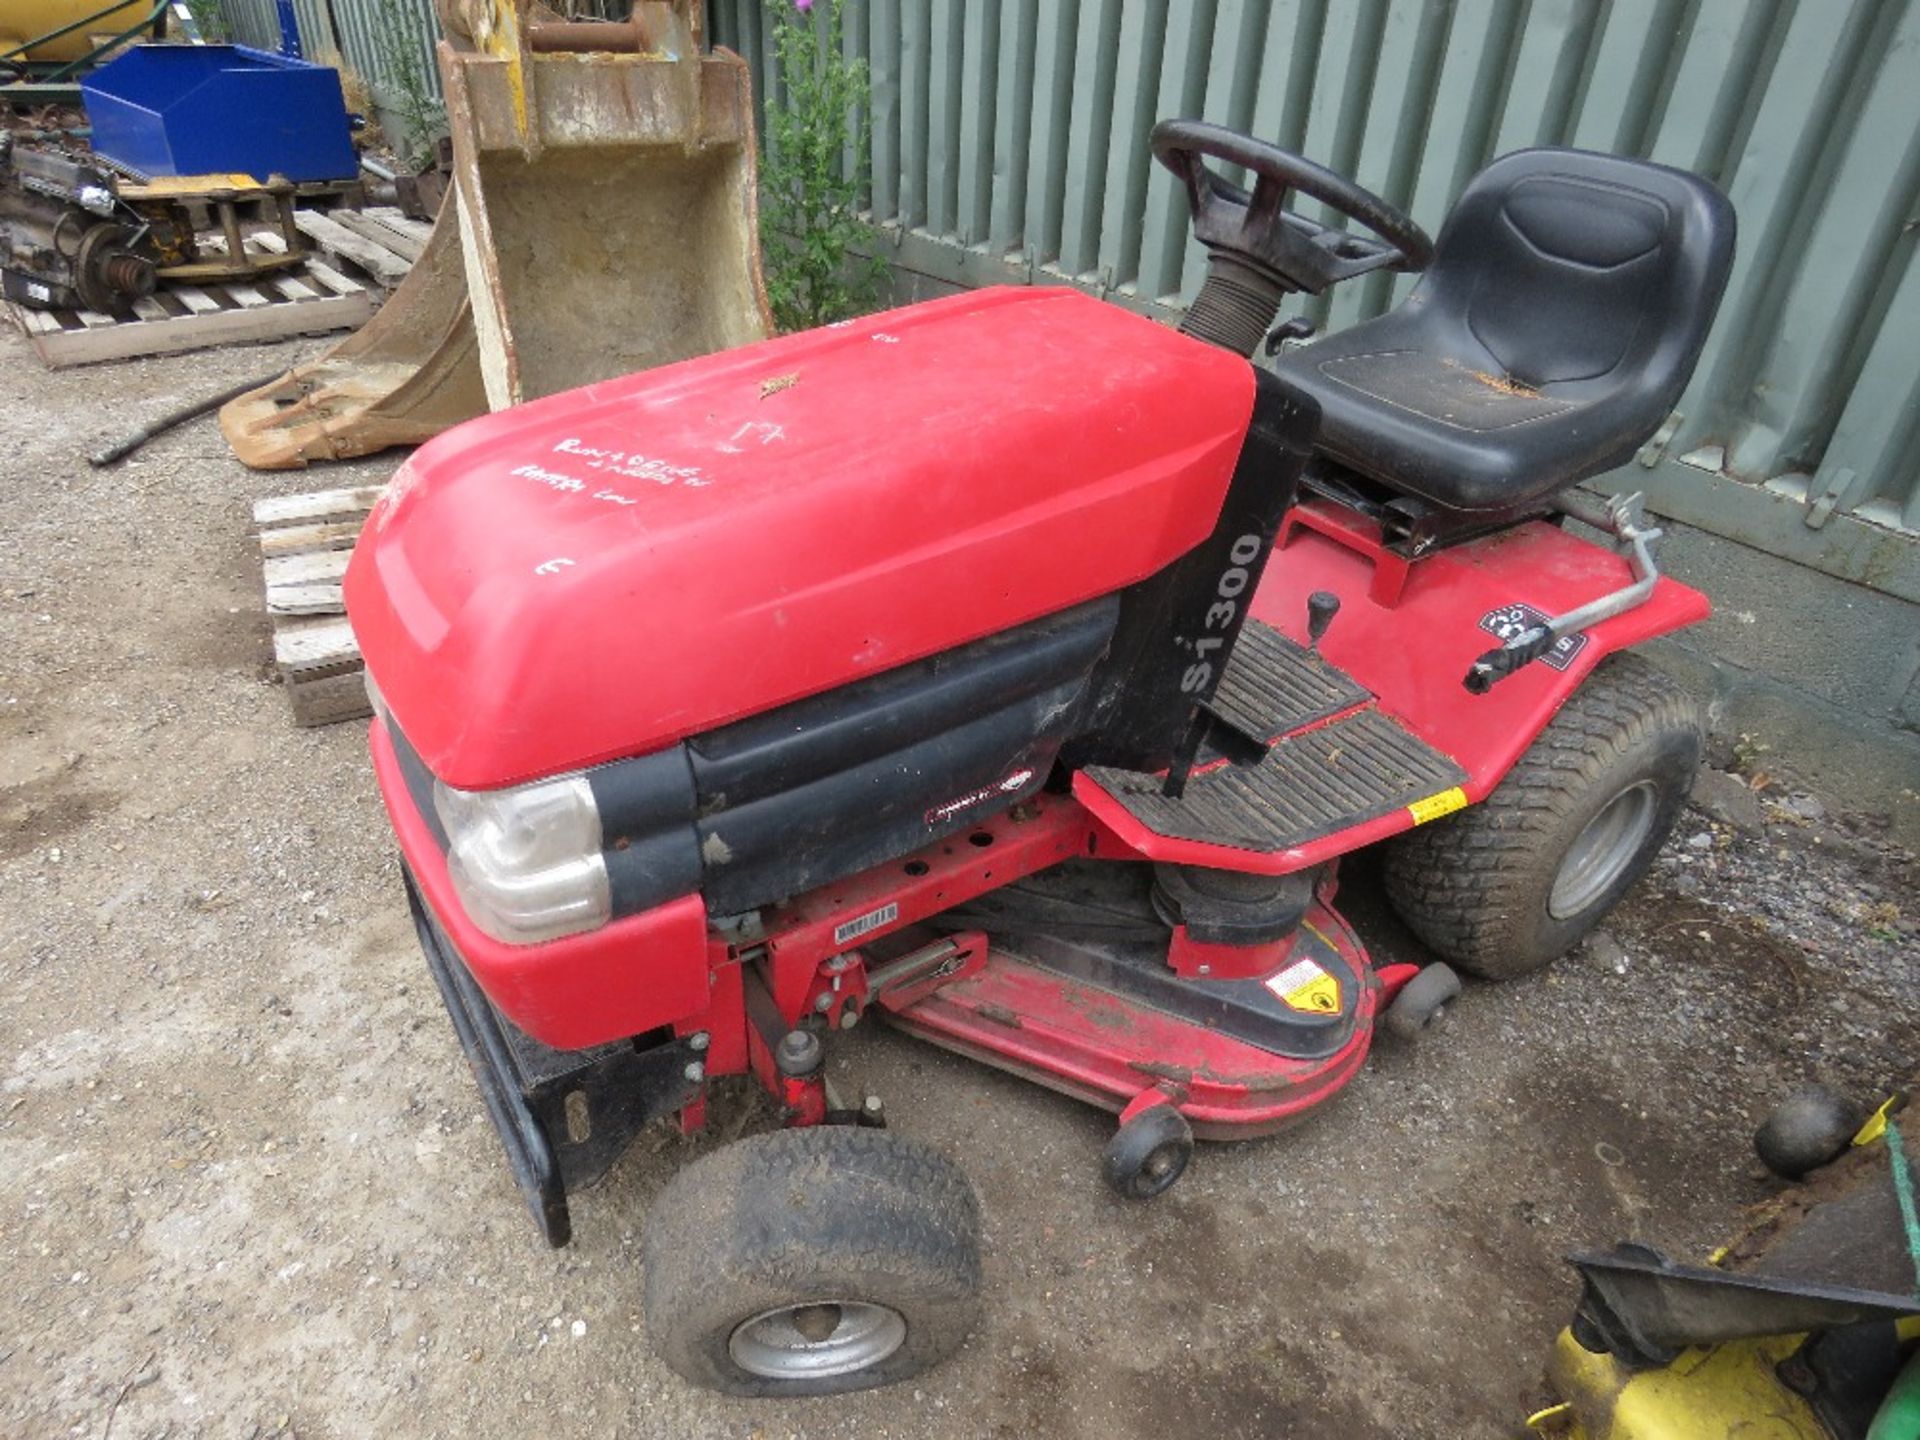 WESTWOOD S1300 RIDE ON MOWER when tested was seen to start, run and drive